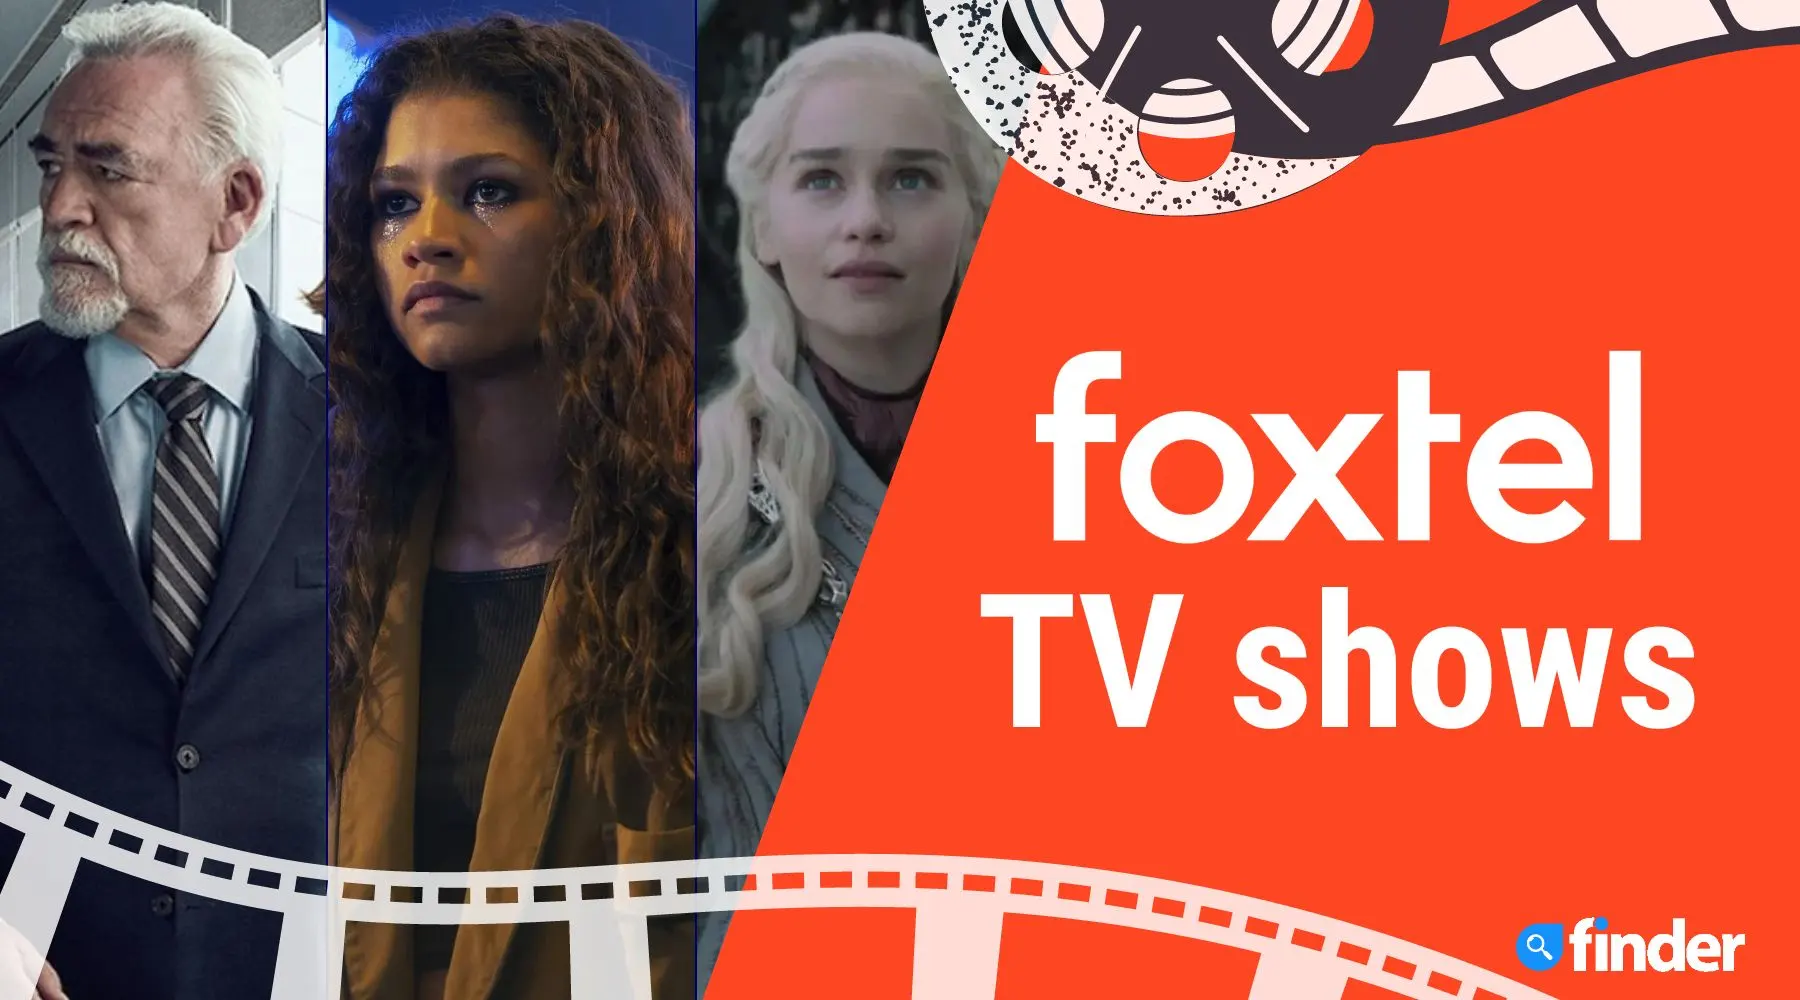 TV shows on Foxtel